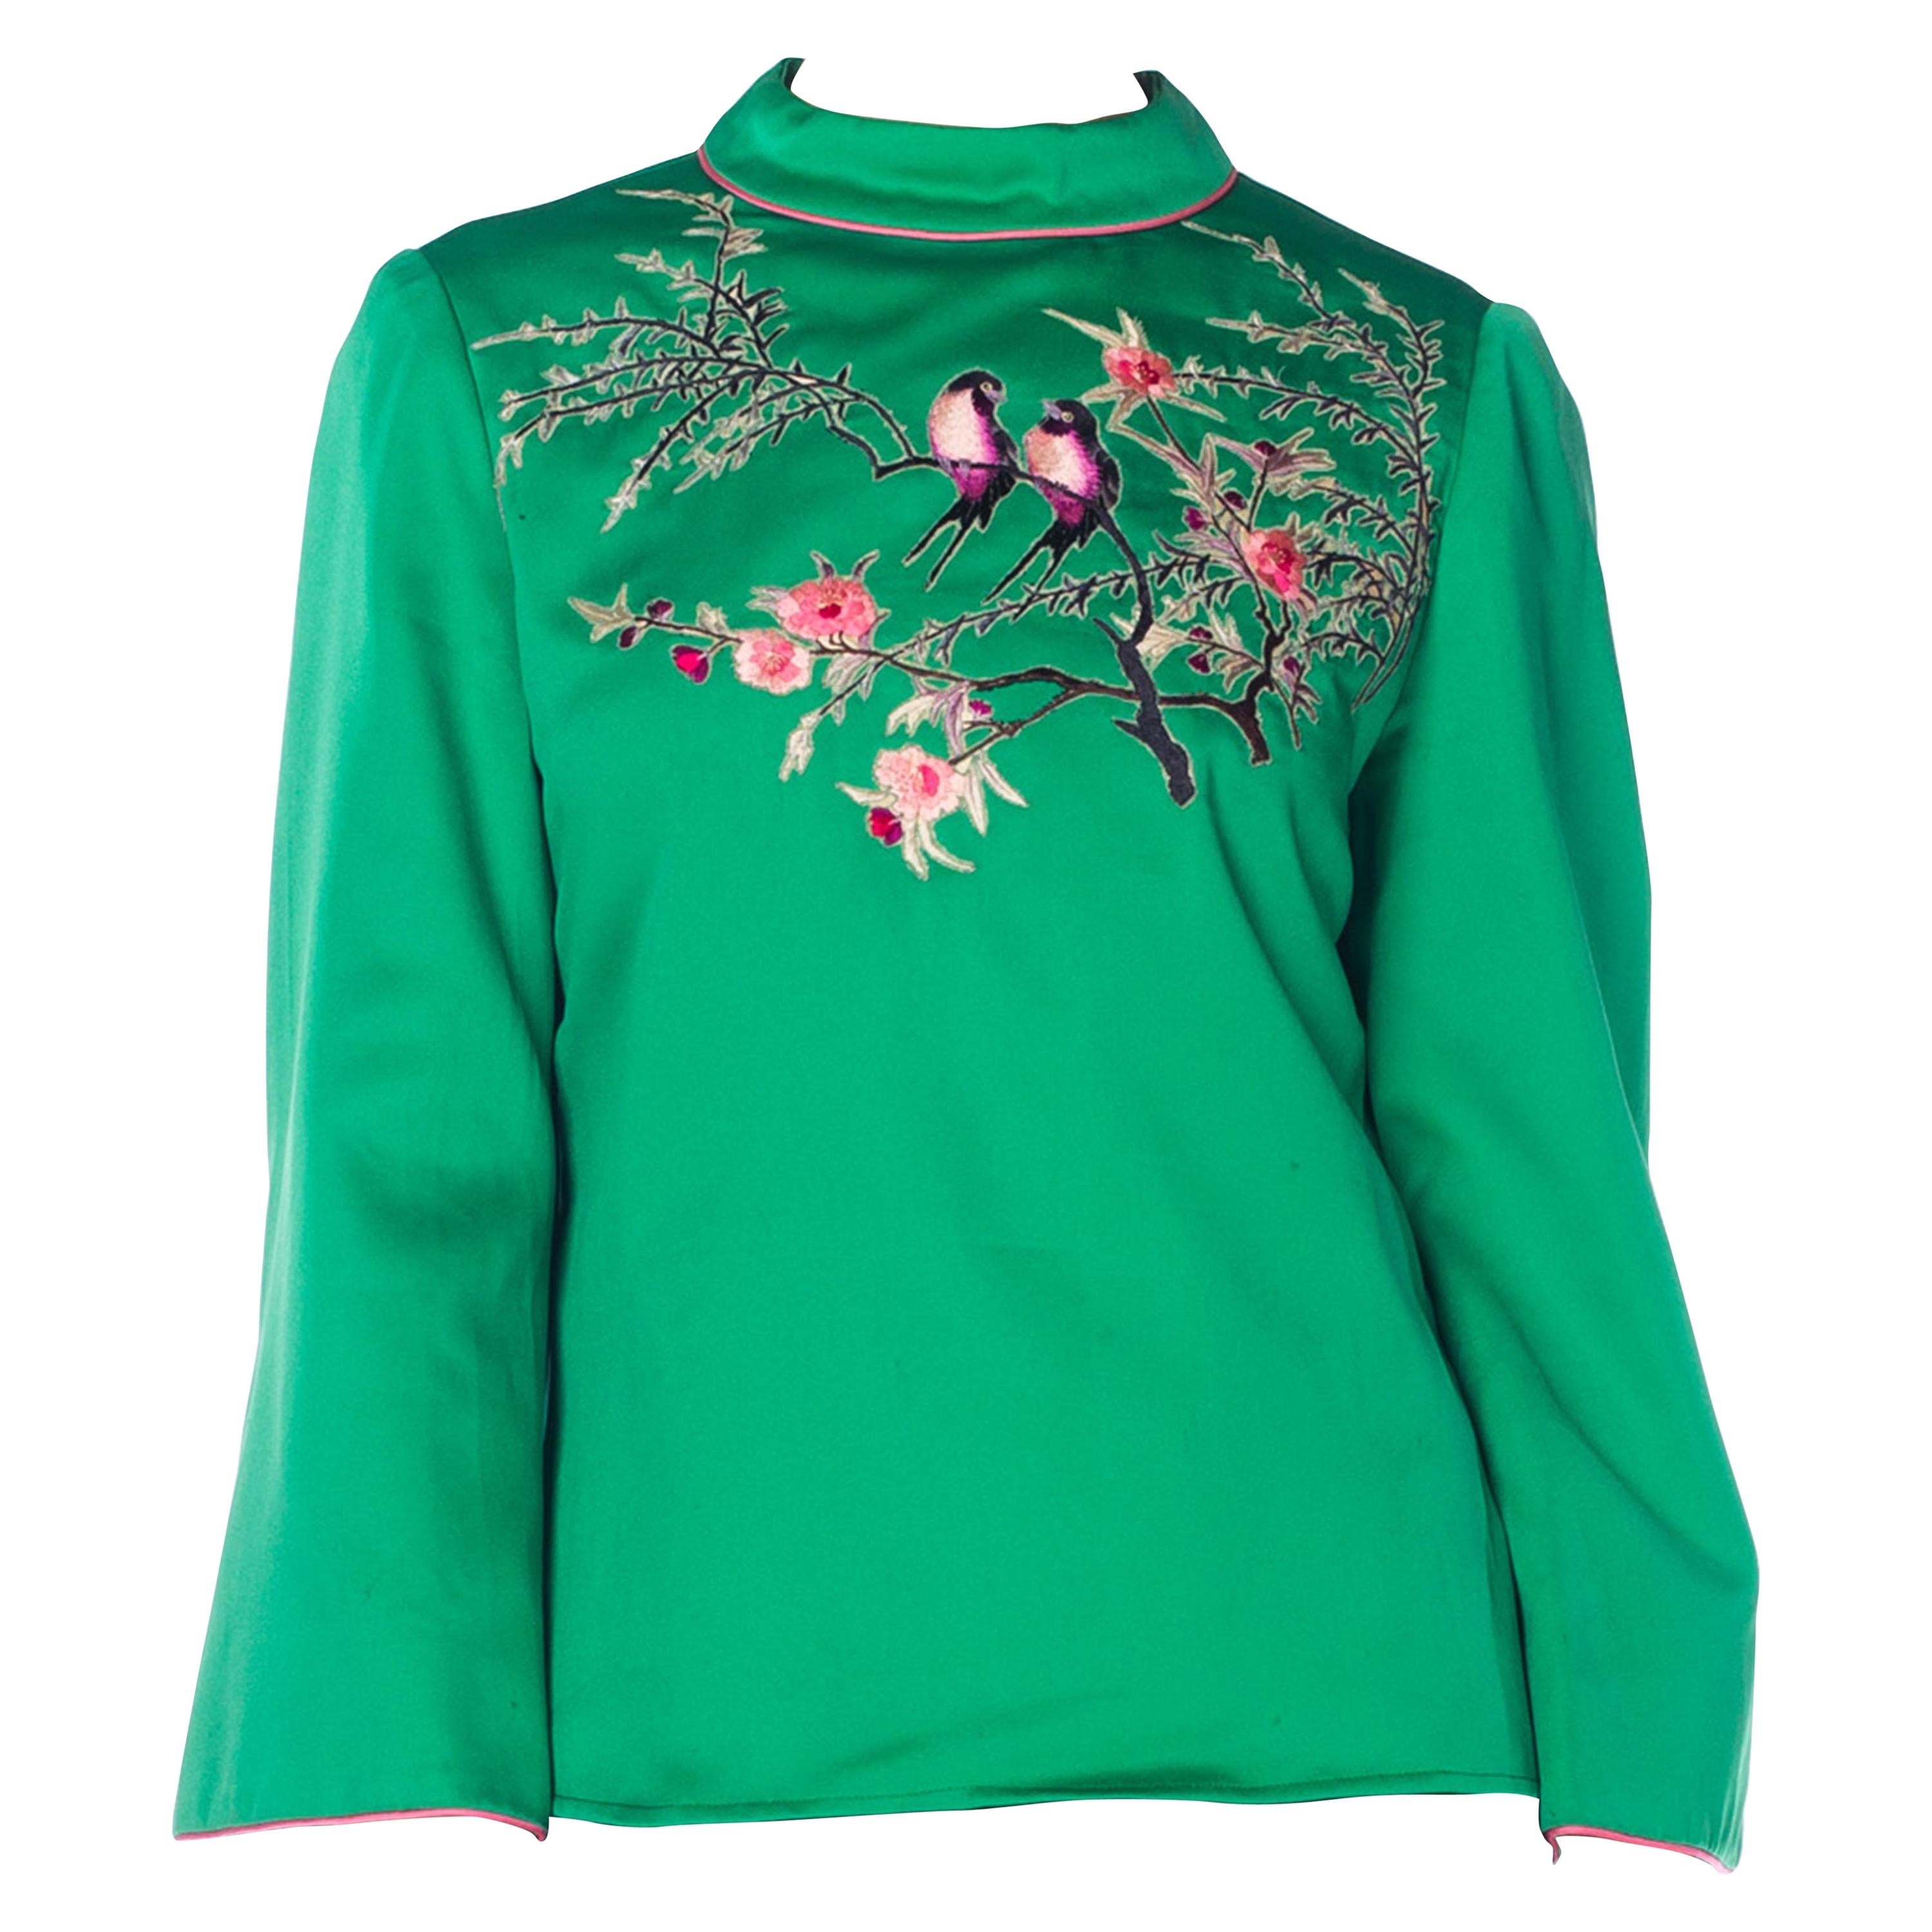 1970S Green Polyester Sateen Top With Hand Embroidered Love Birds And Flowers